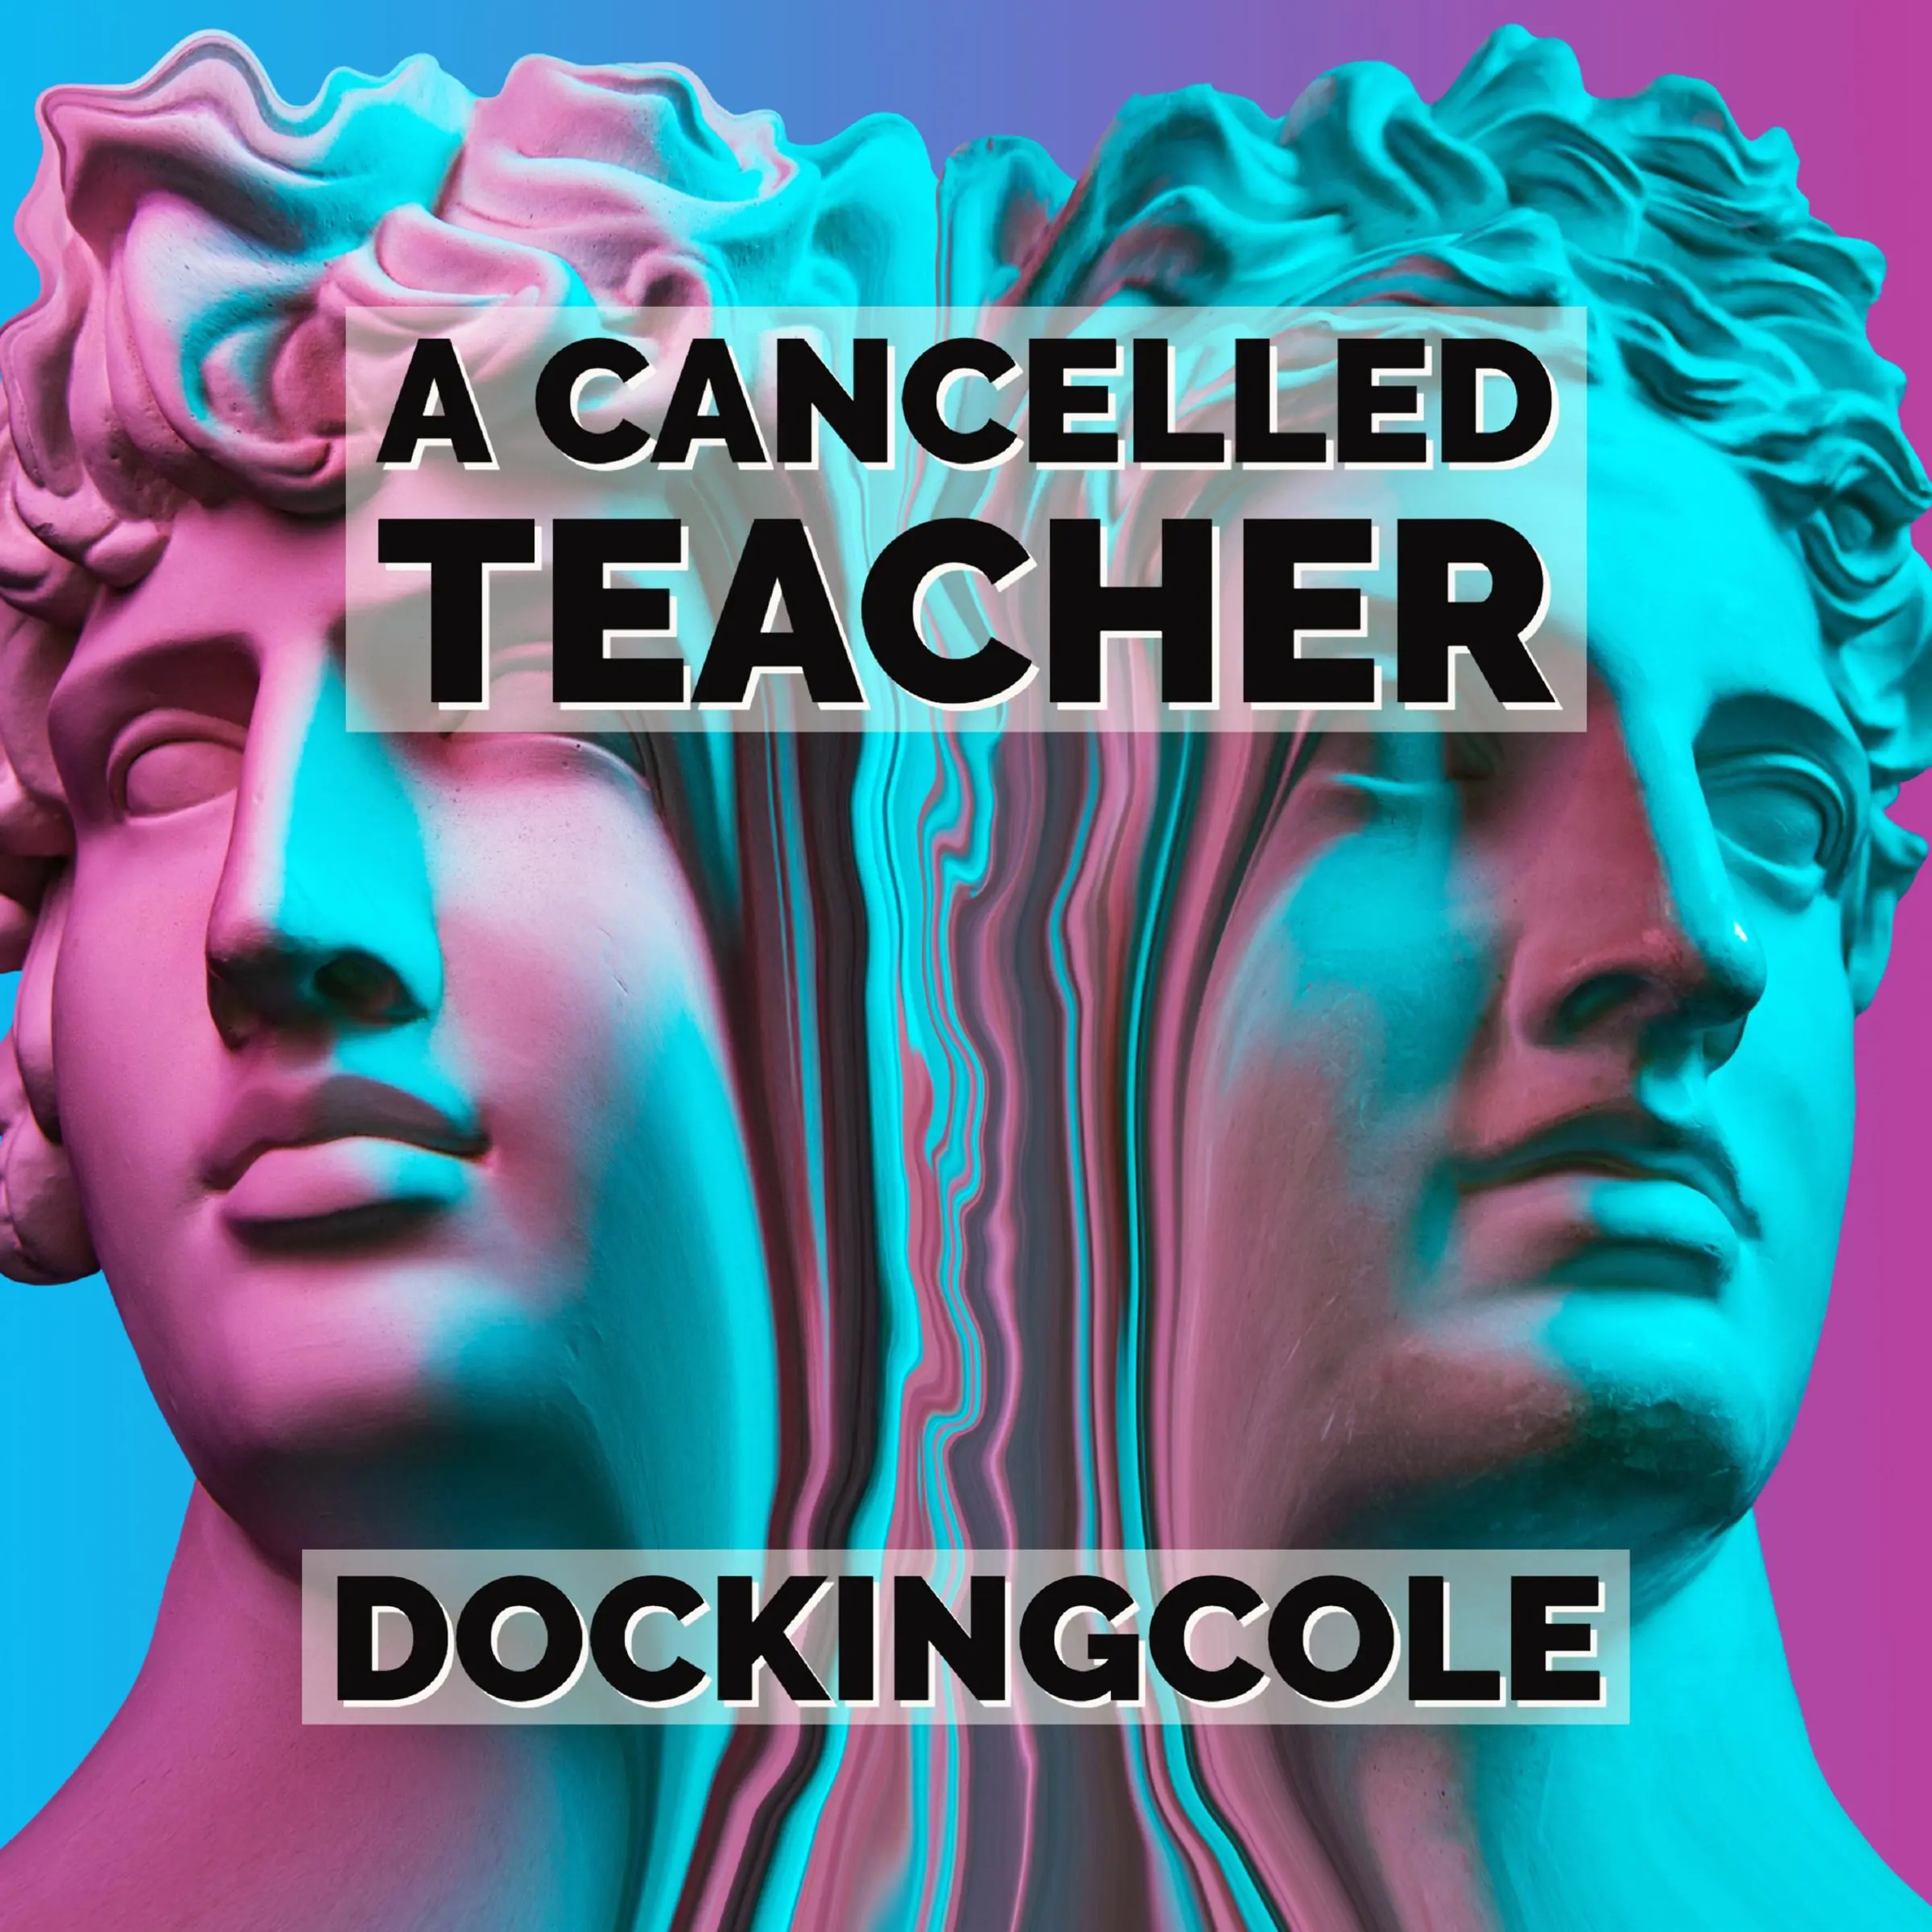 A Cancelled Teacher Audiobook by Doc King Cole